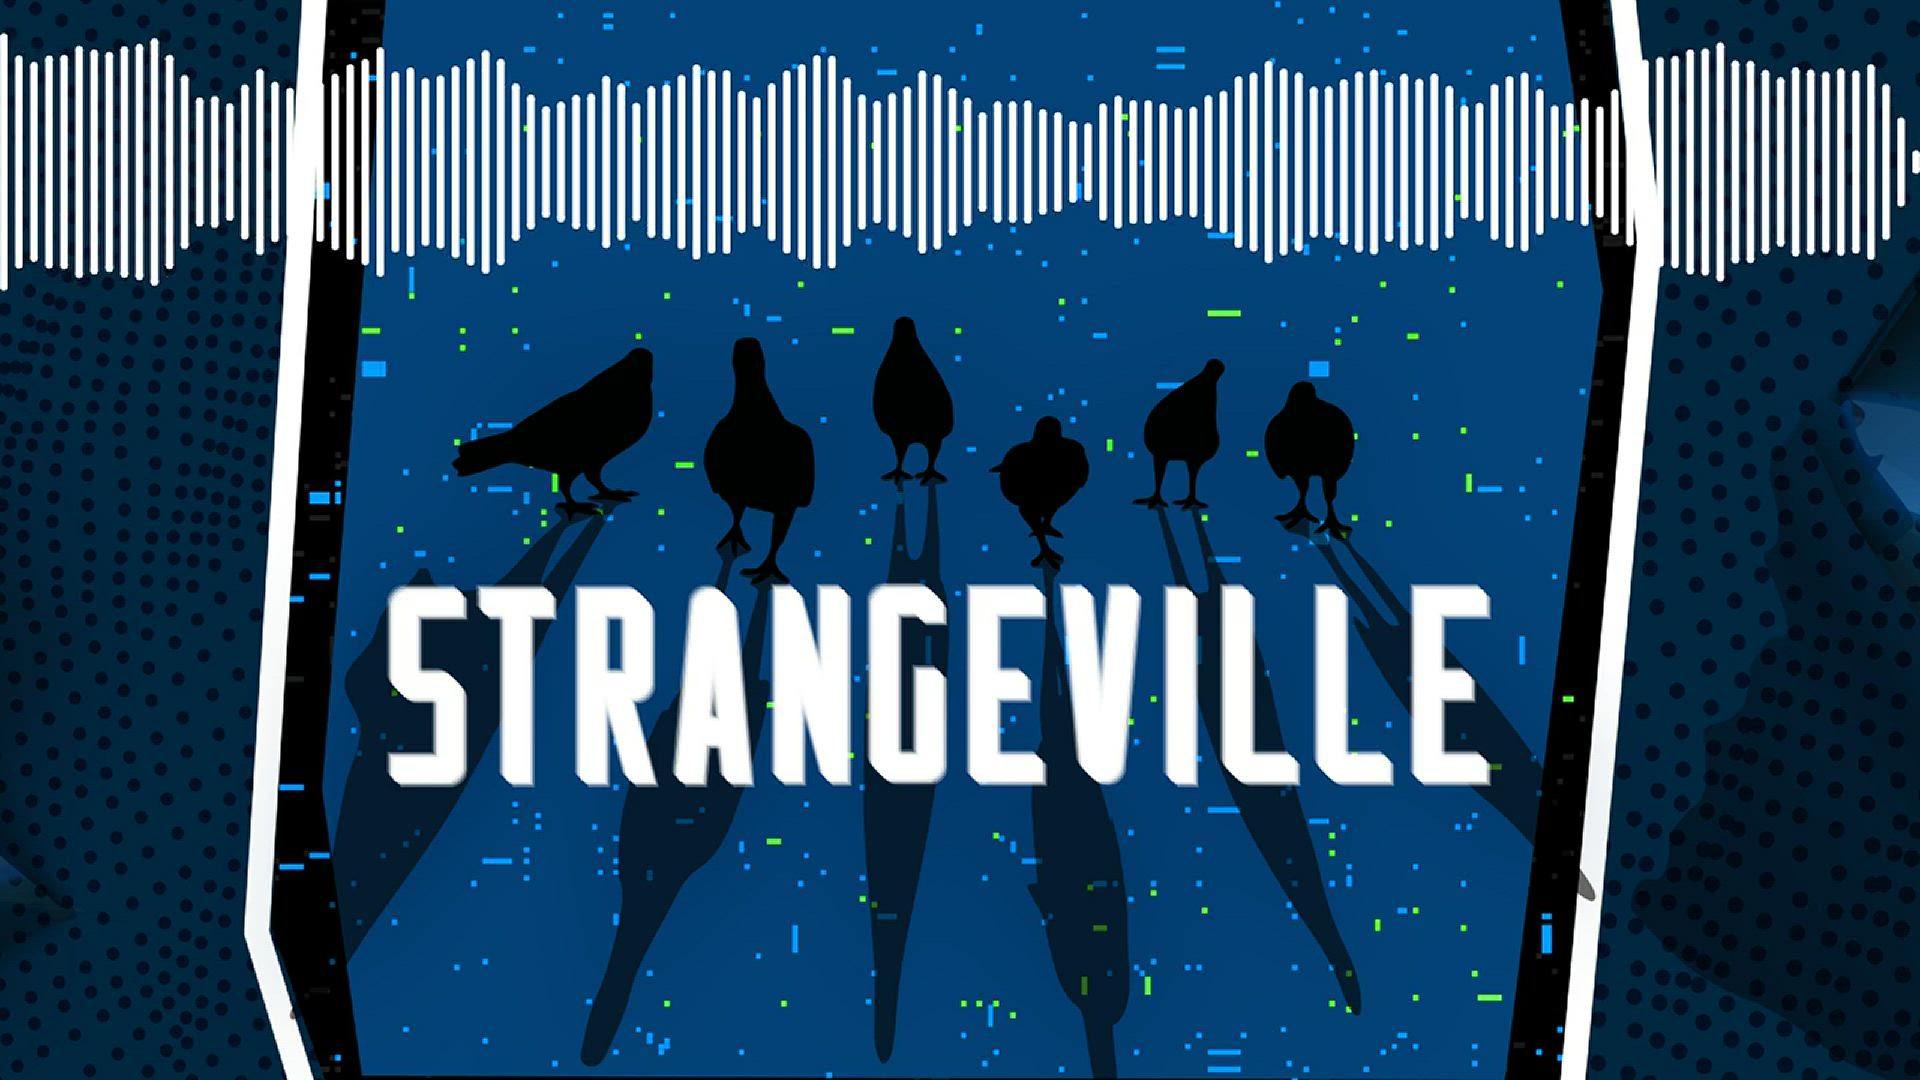 The new podcast Strangeville covers unusual crimes across the country.